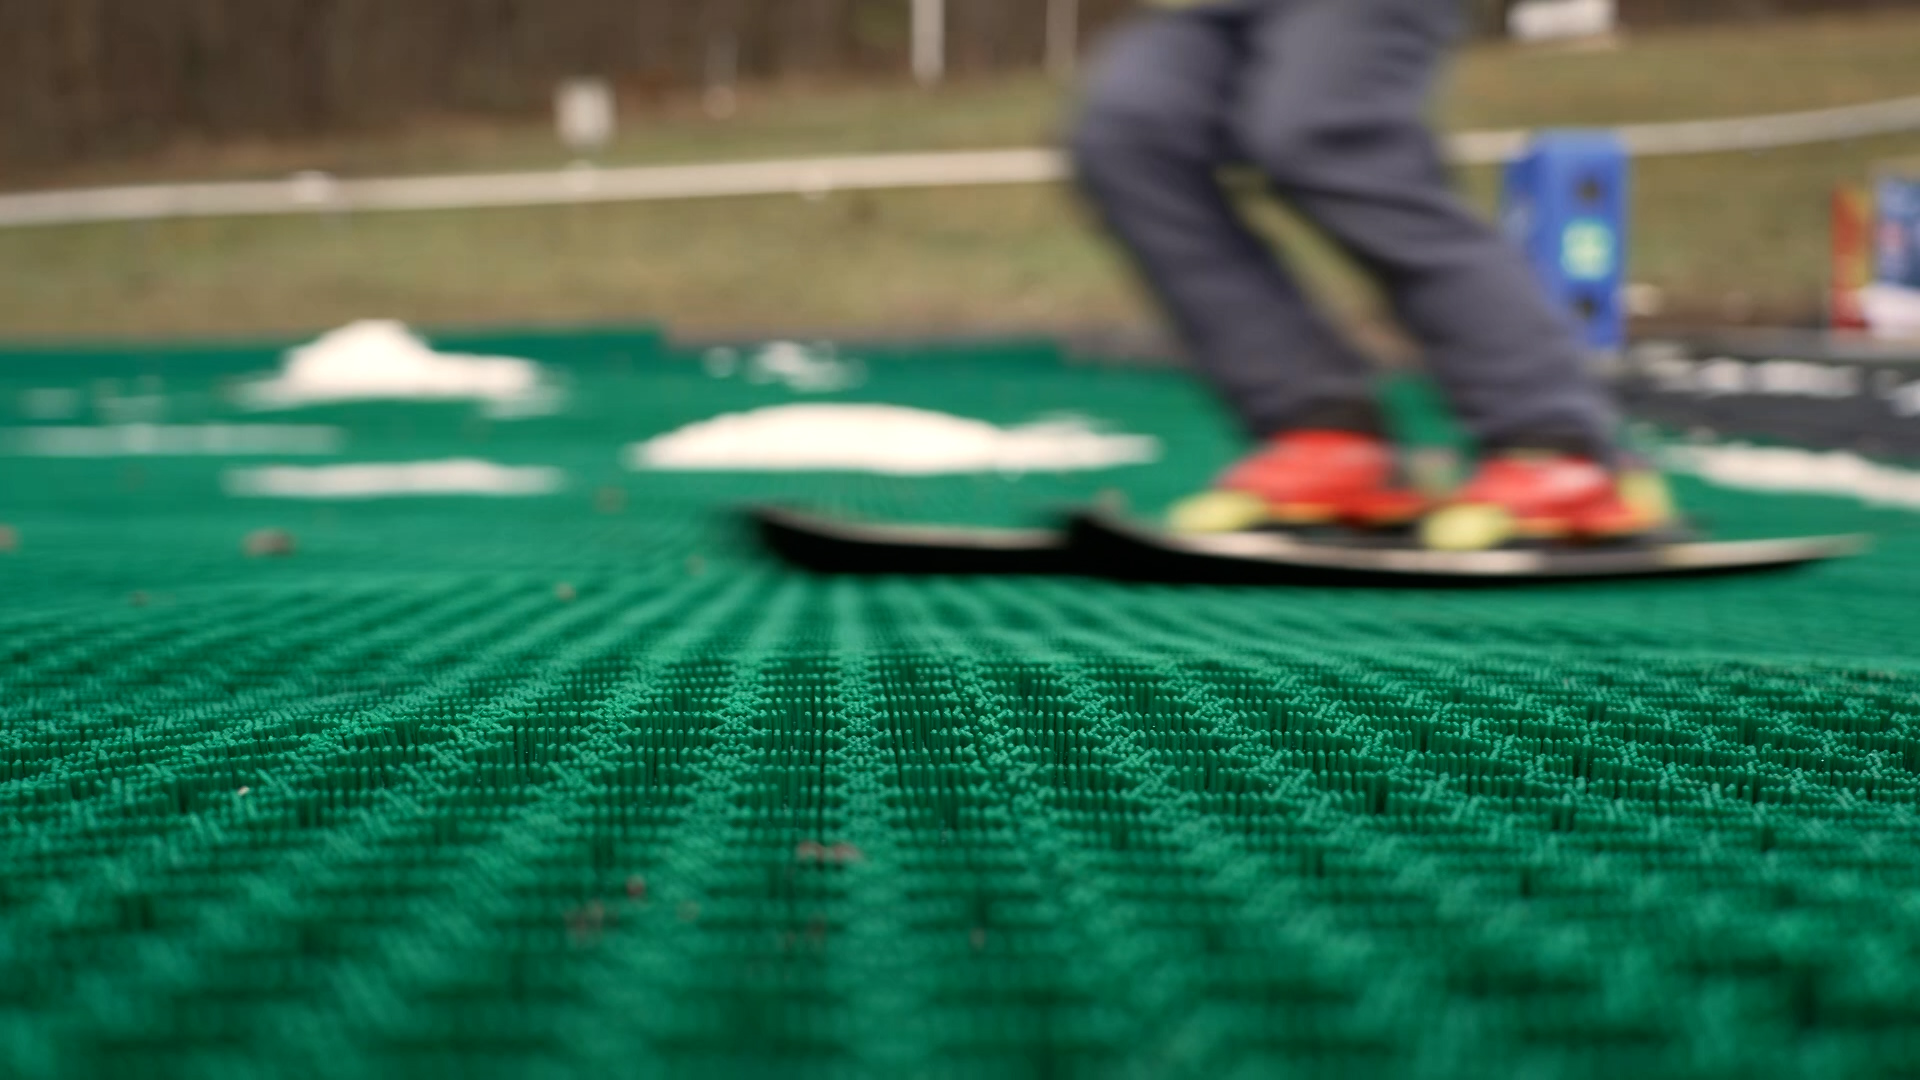 Vienna's plastic skiing carpet is made of recycled materials. /Dworschak/CGTN